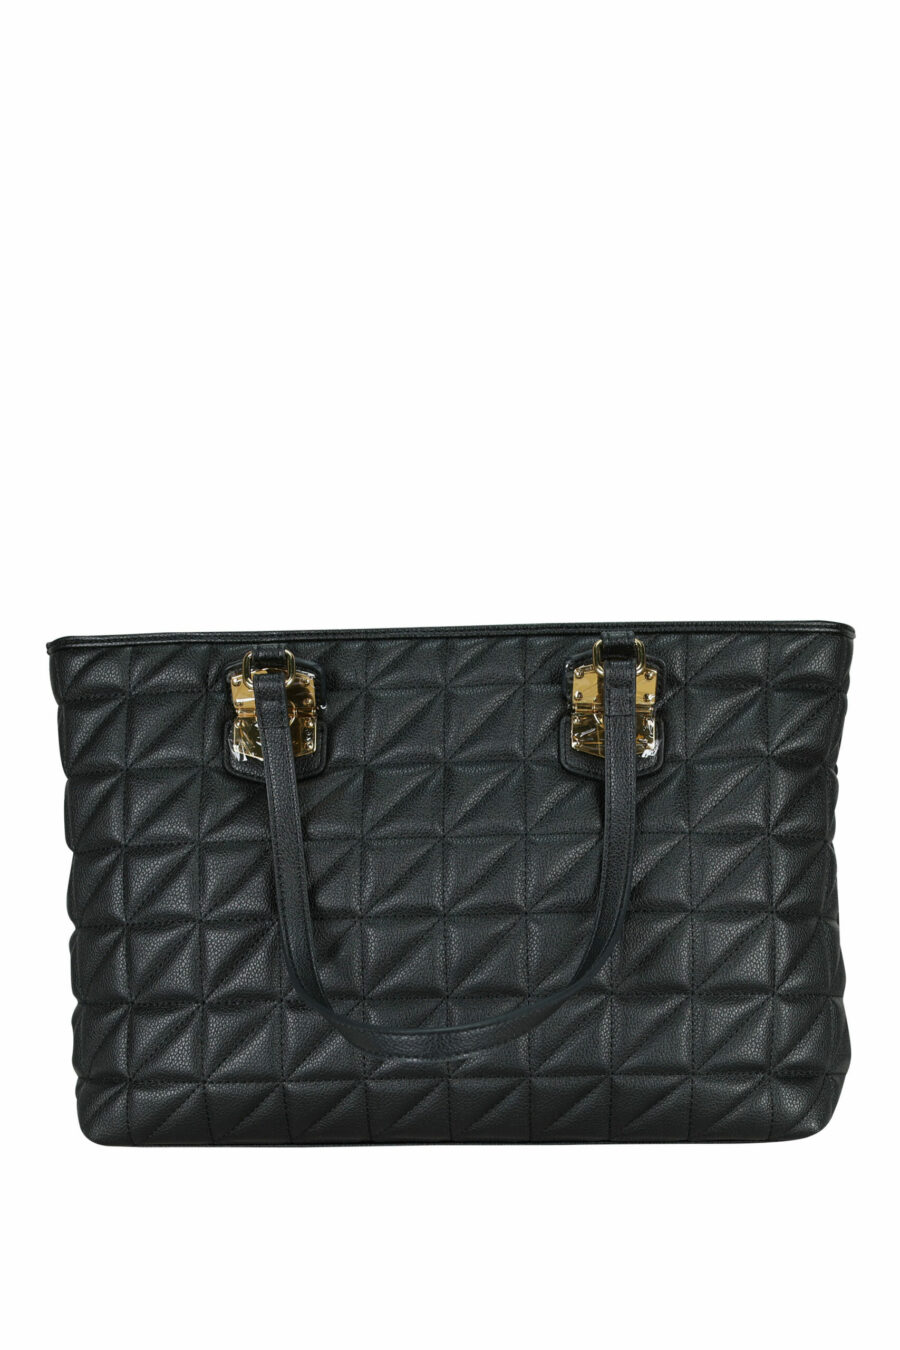 Black quilted shopper bag with gold lettering minilogue - 8050537994992 2 scaled